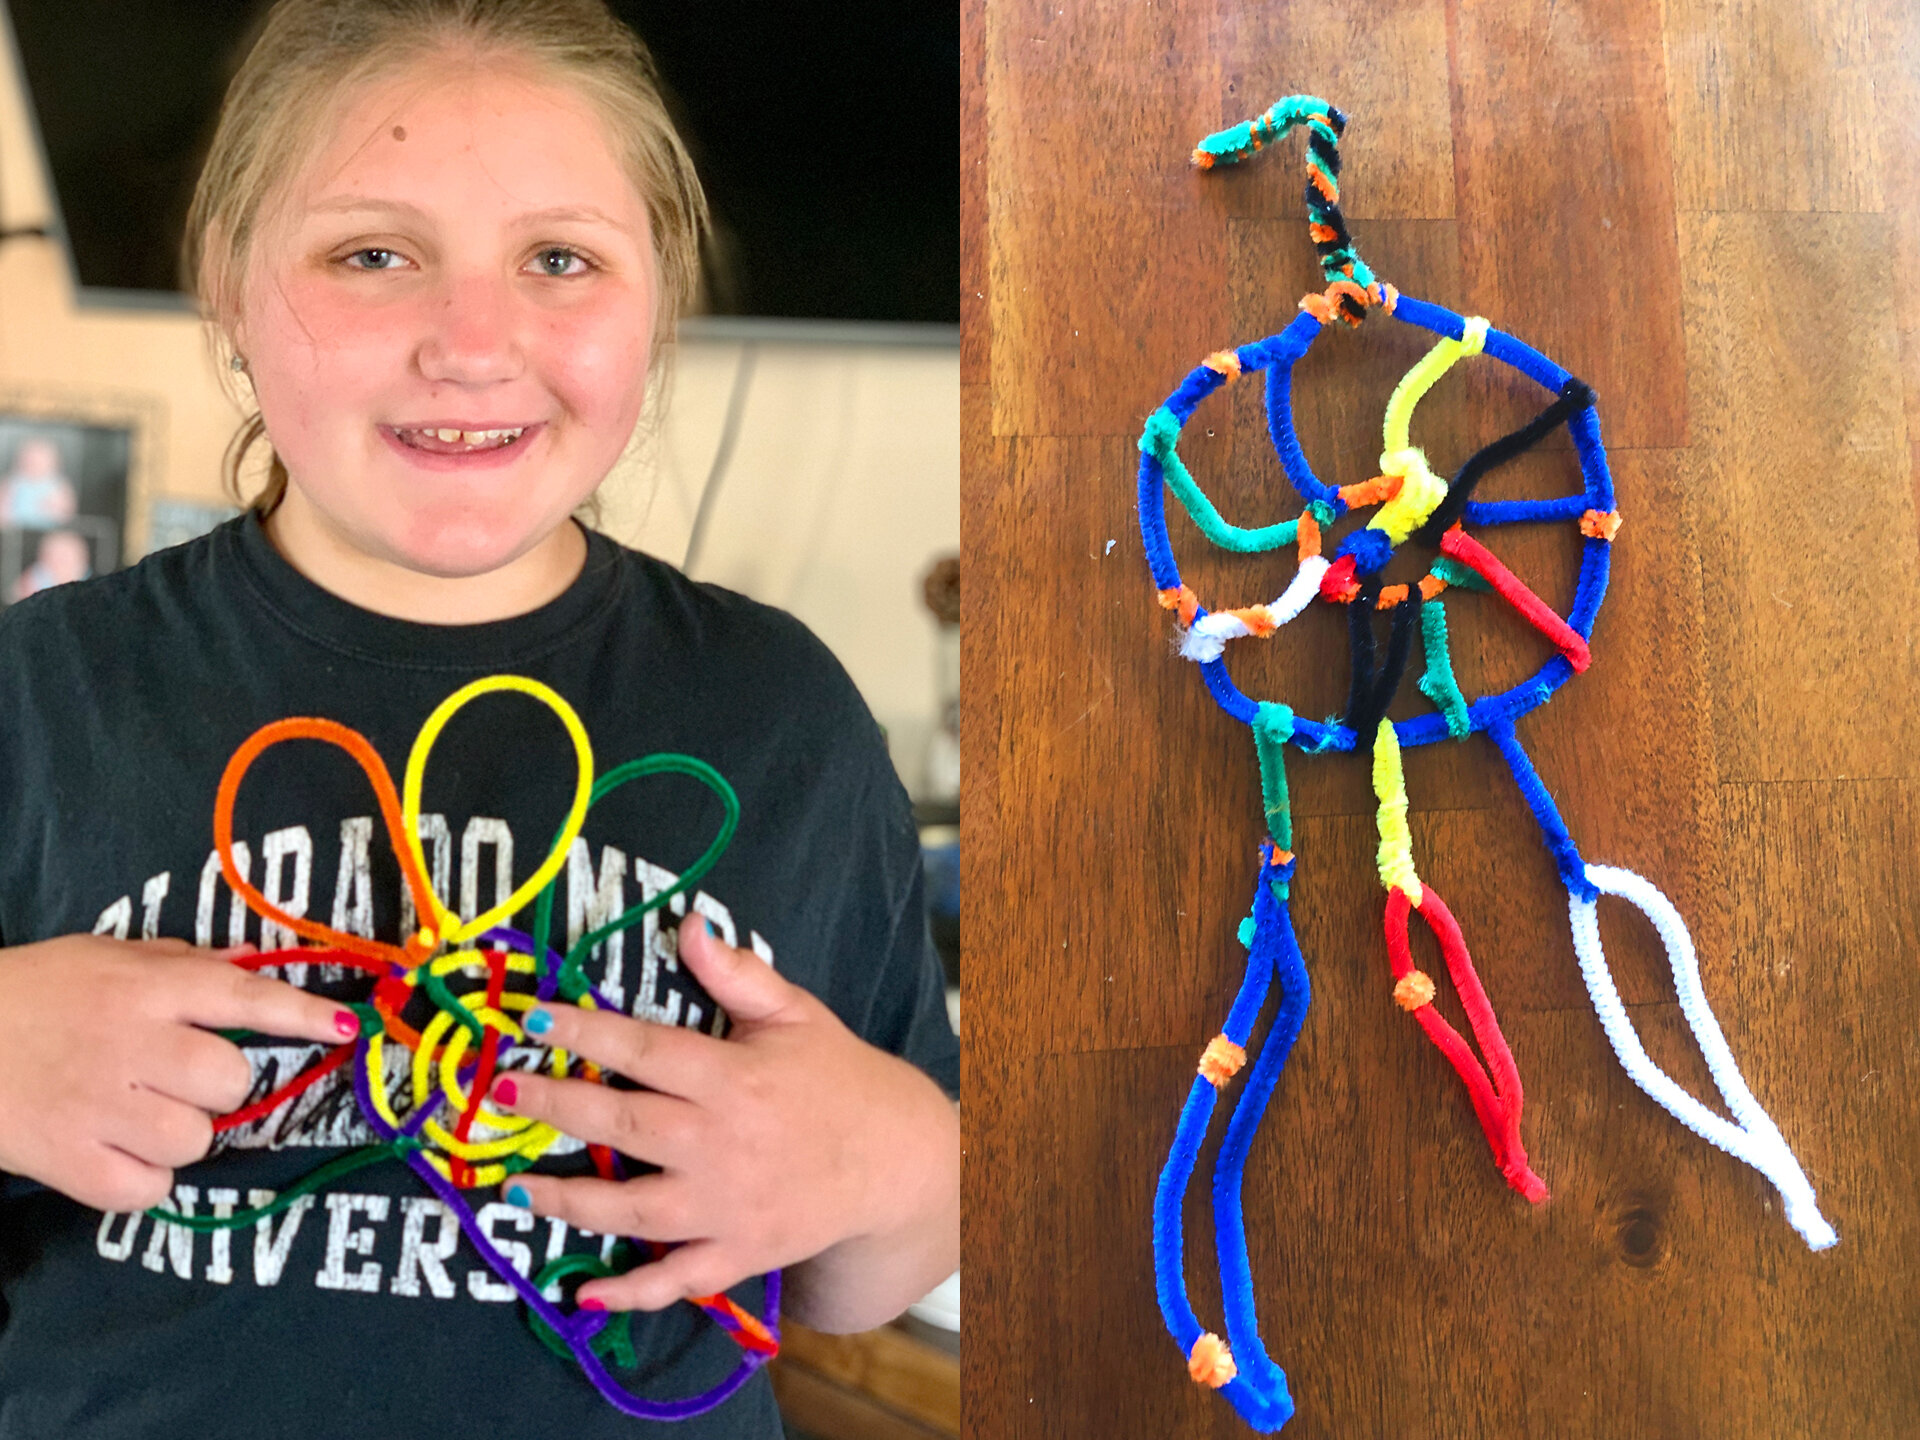 Isabelle with her Dreamcatcher on the left and Dreamcatcher by Hannah on the right